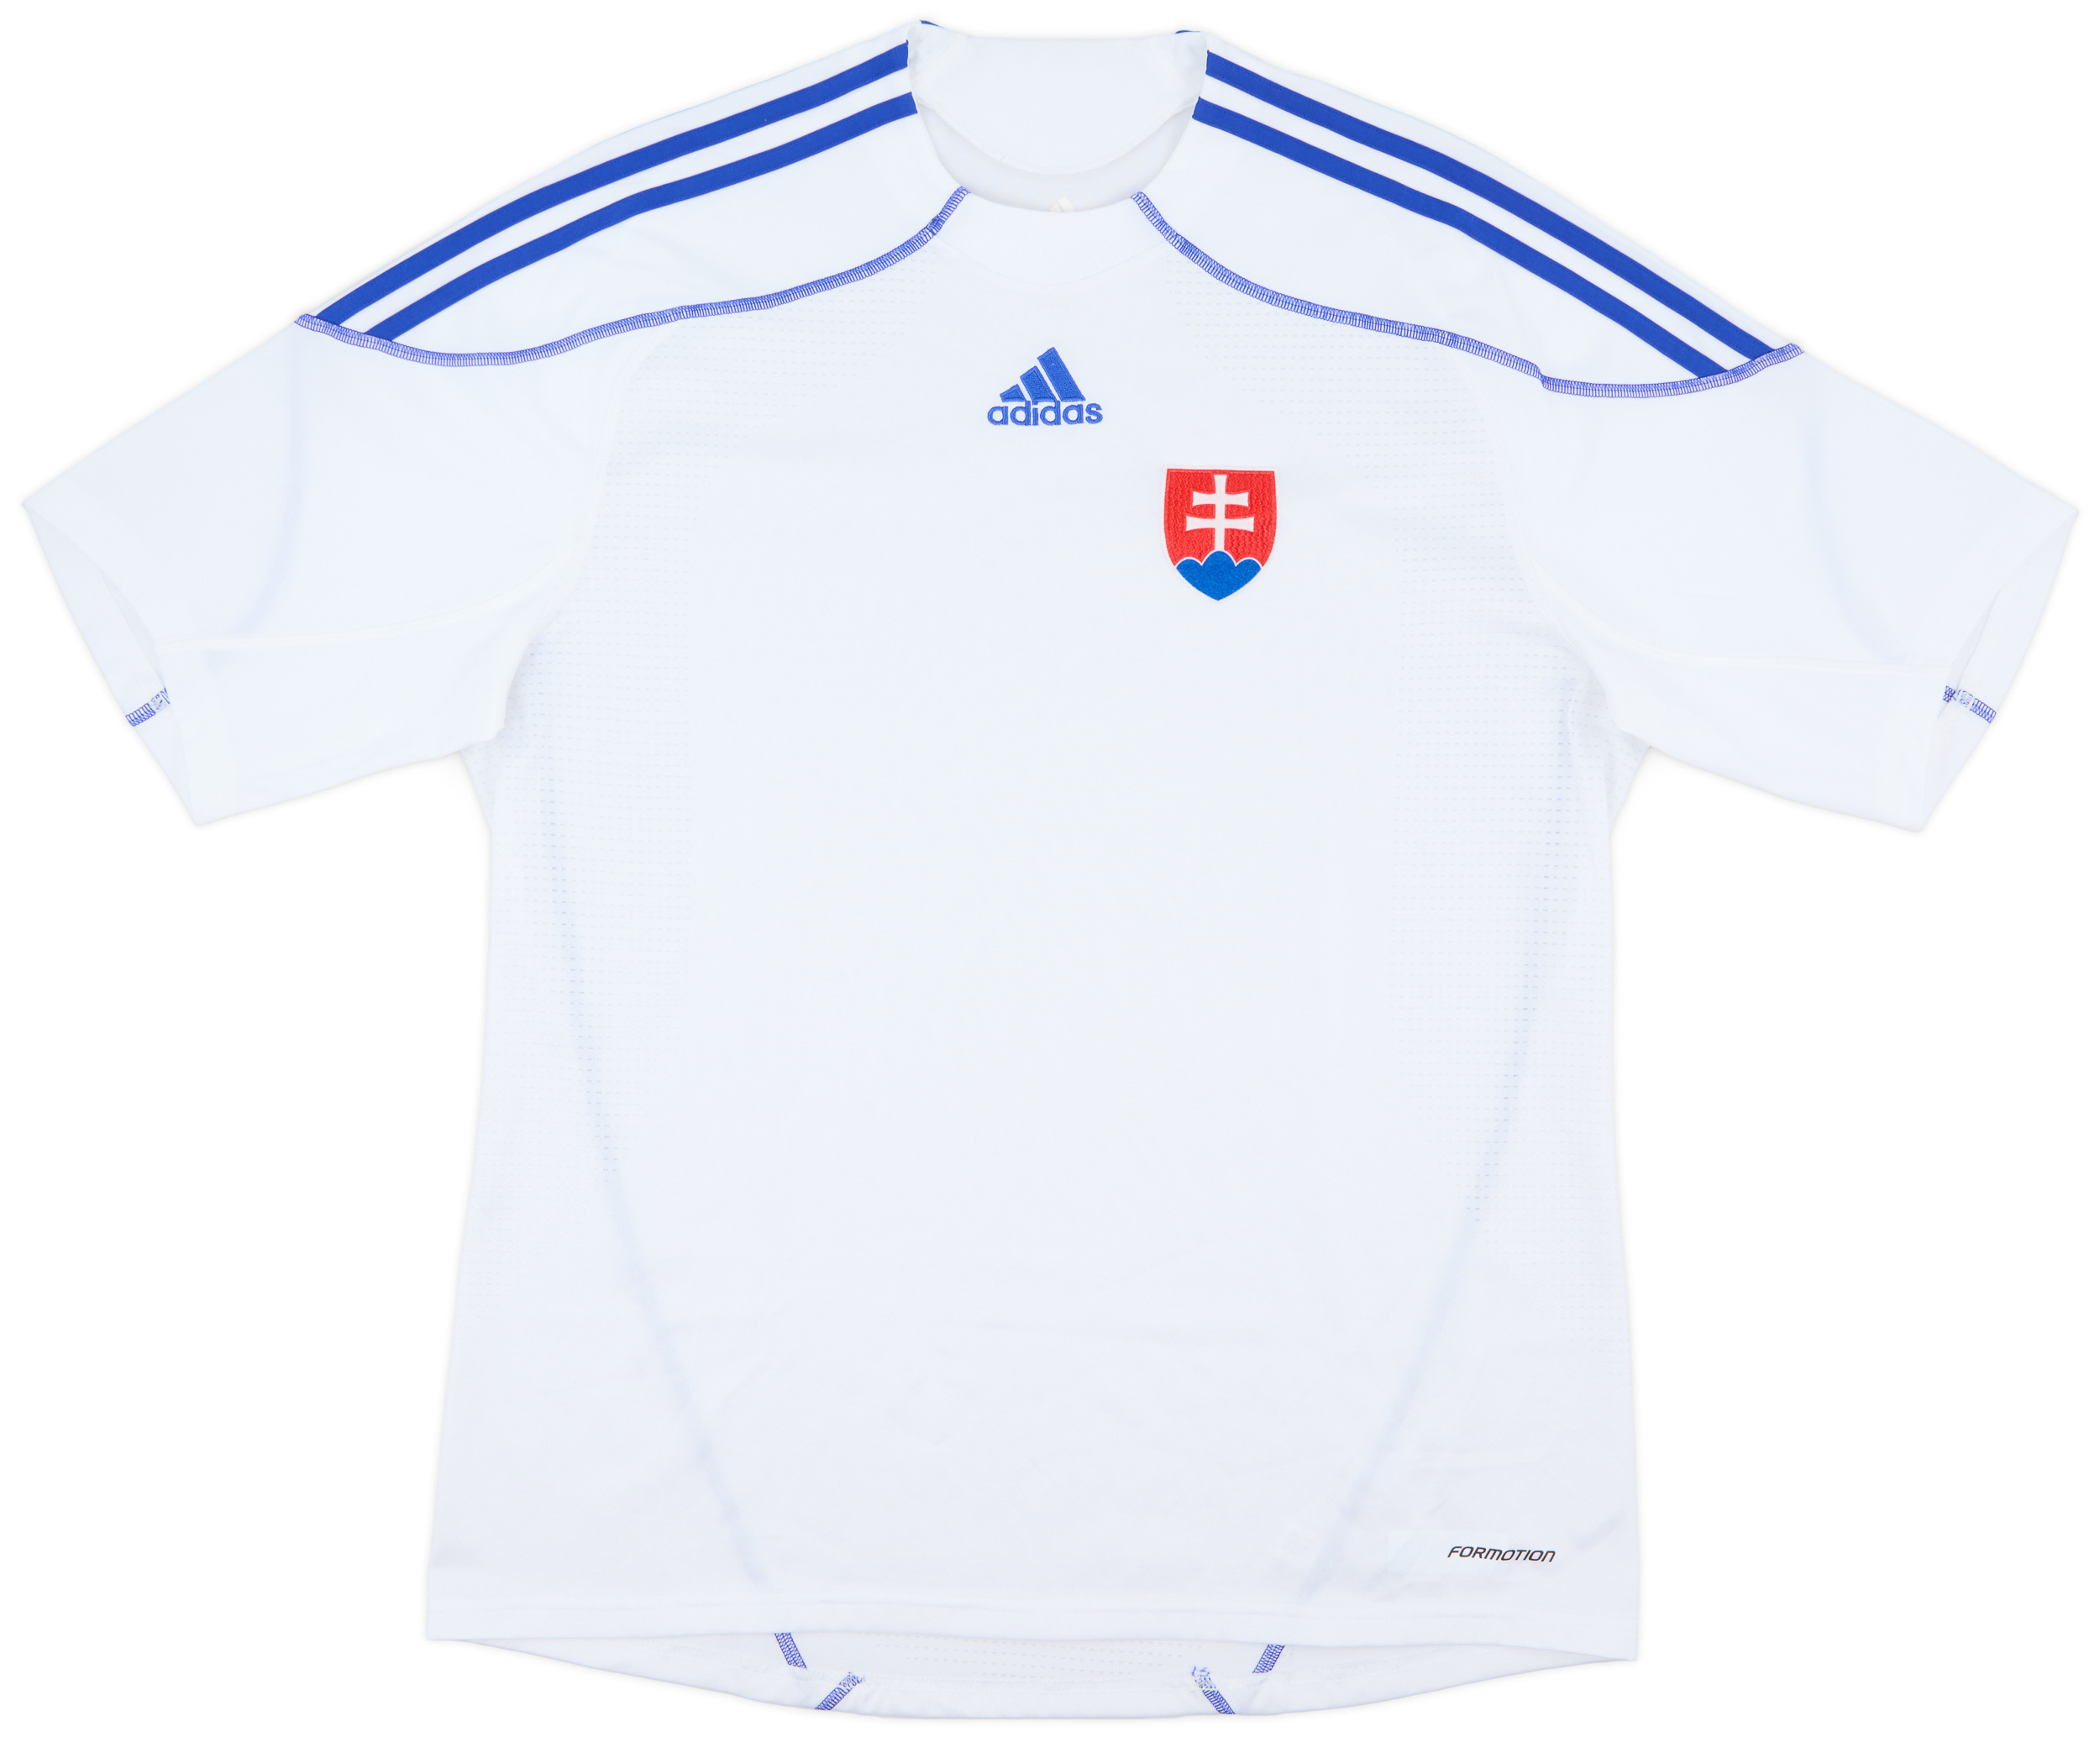 2010-12 Slovakia Player Issue Home Shirt - 9/10 - ()